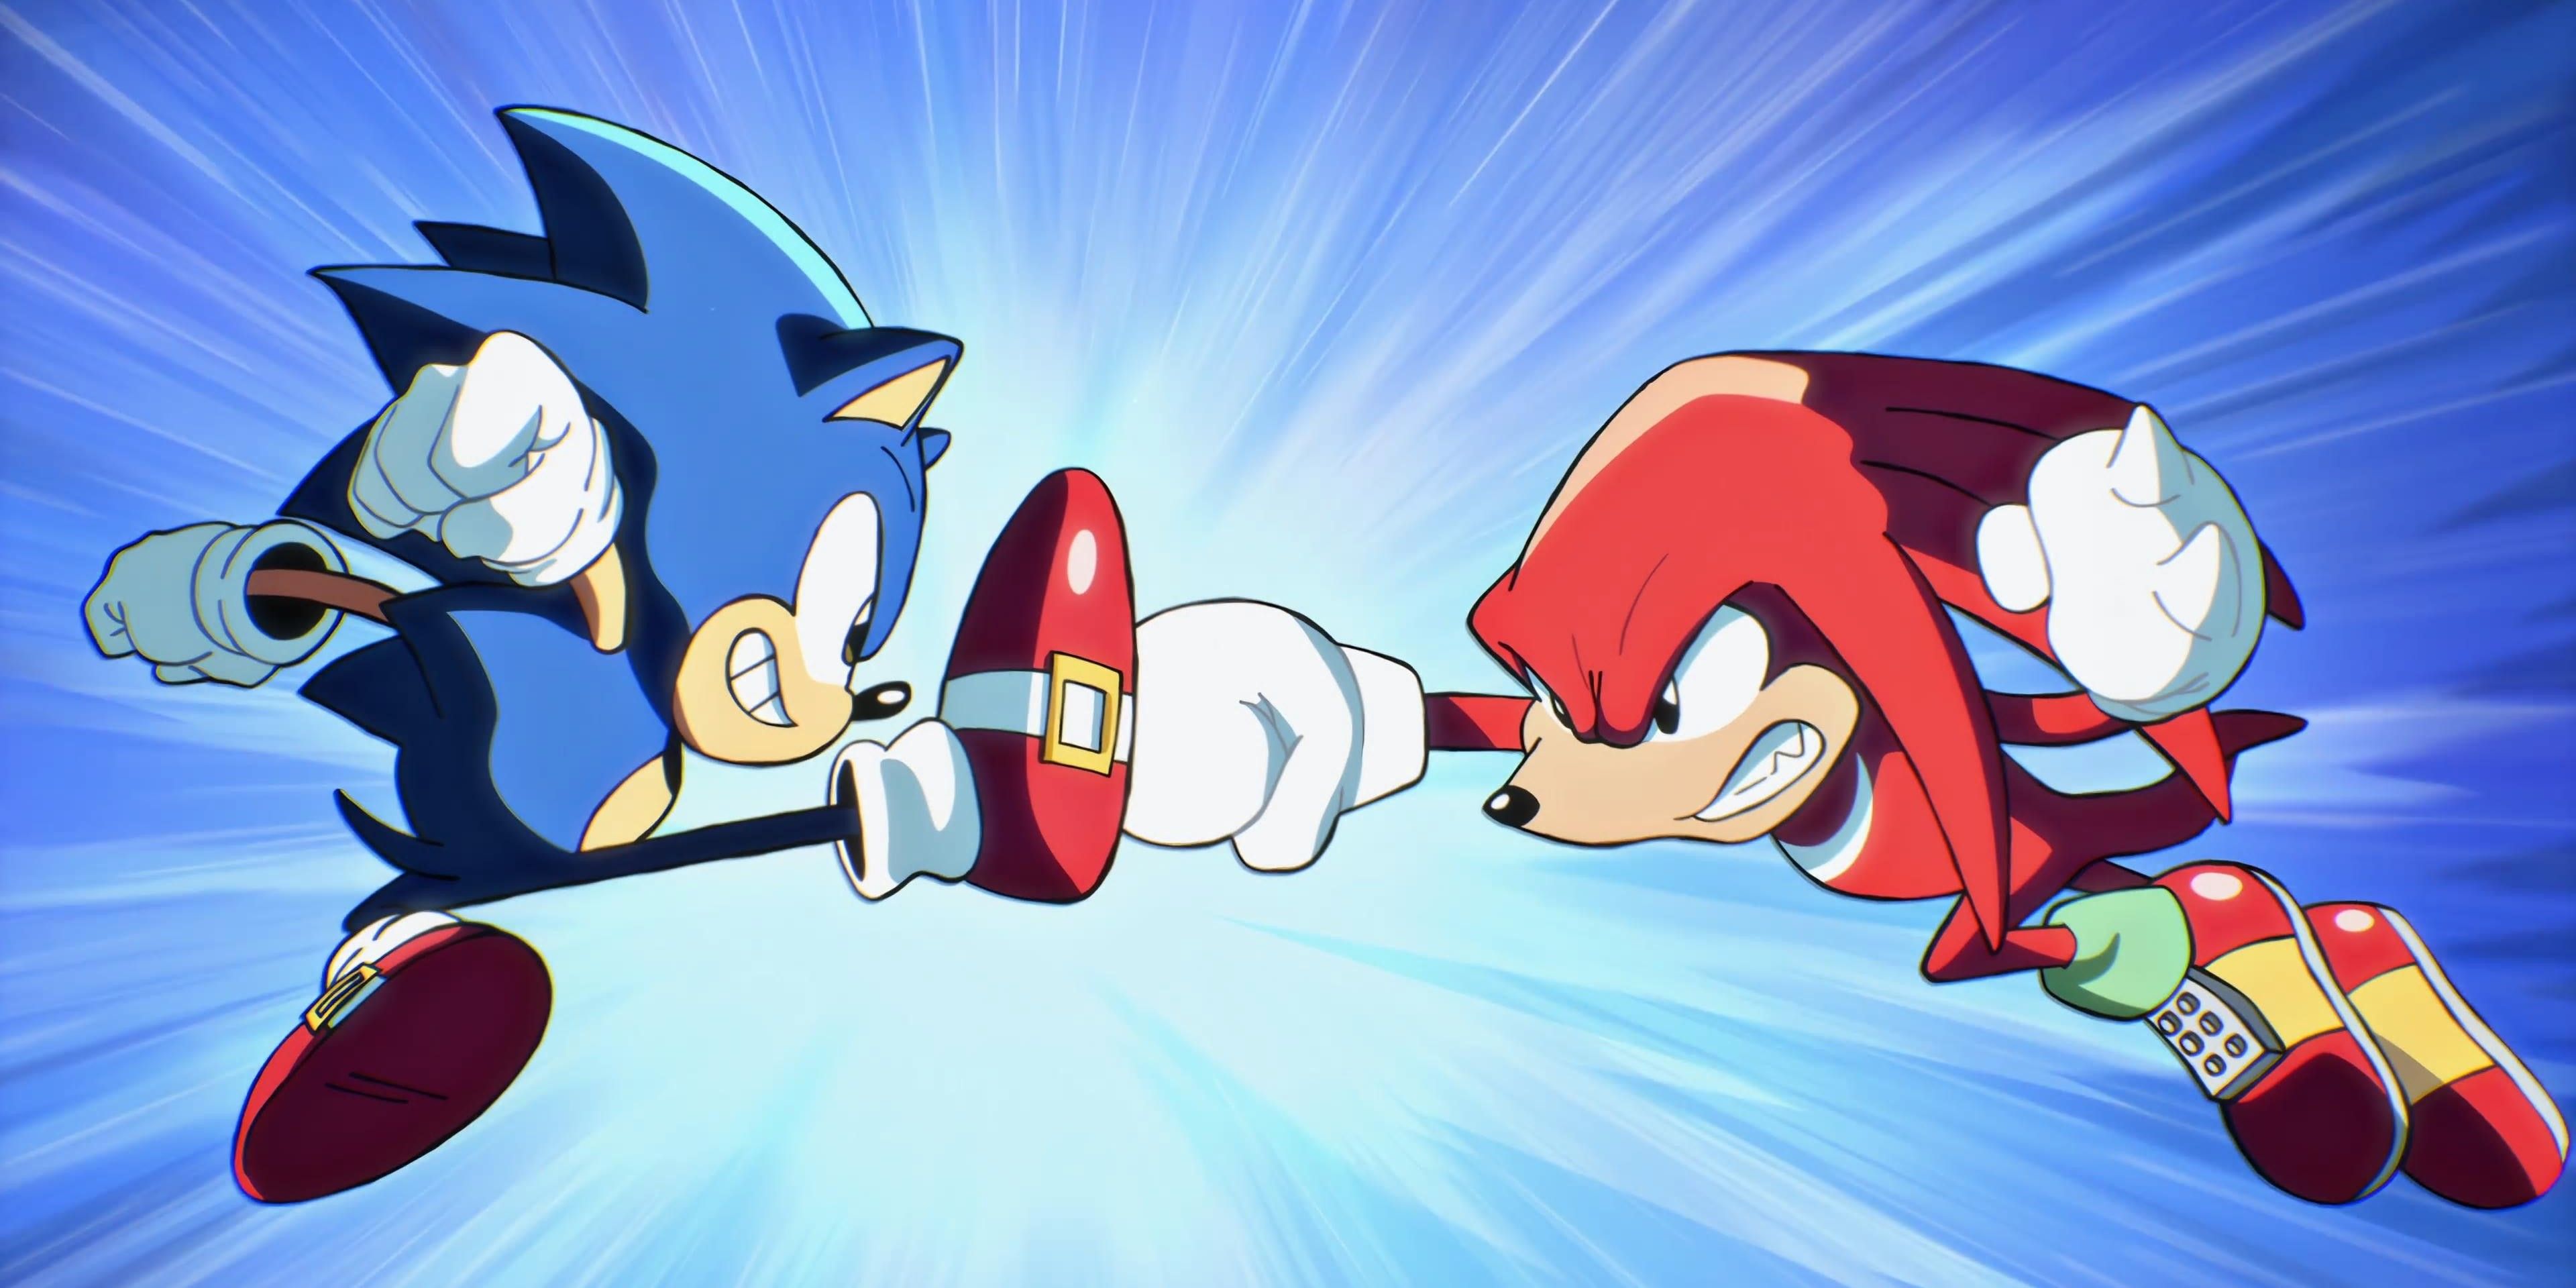 Sonic vs Knuckles from the Sonic Origins Trailer